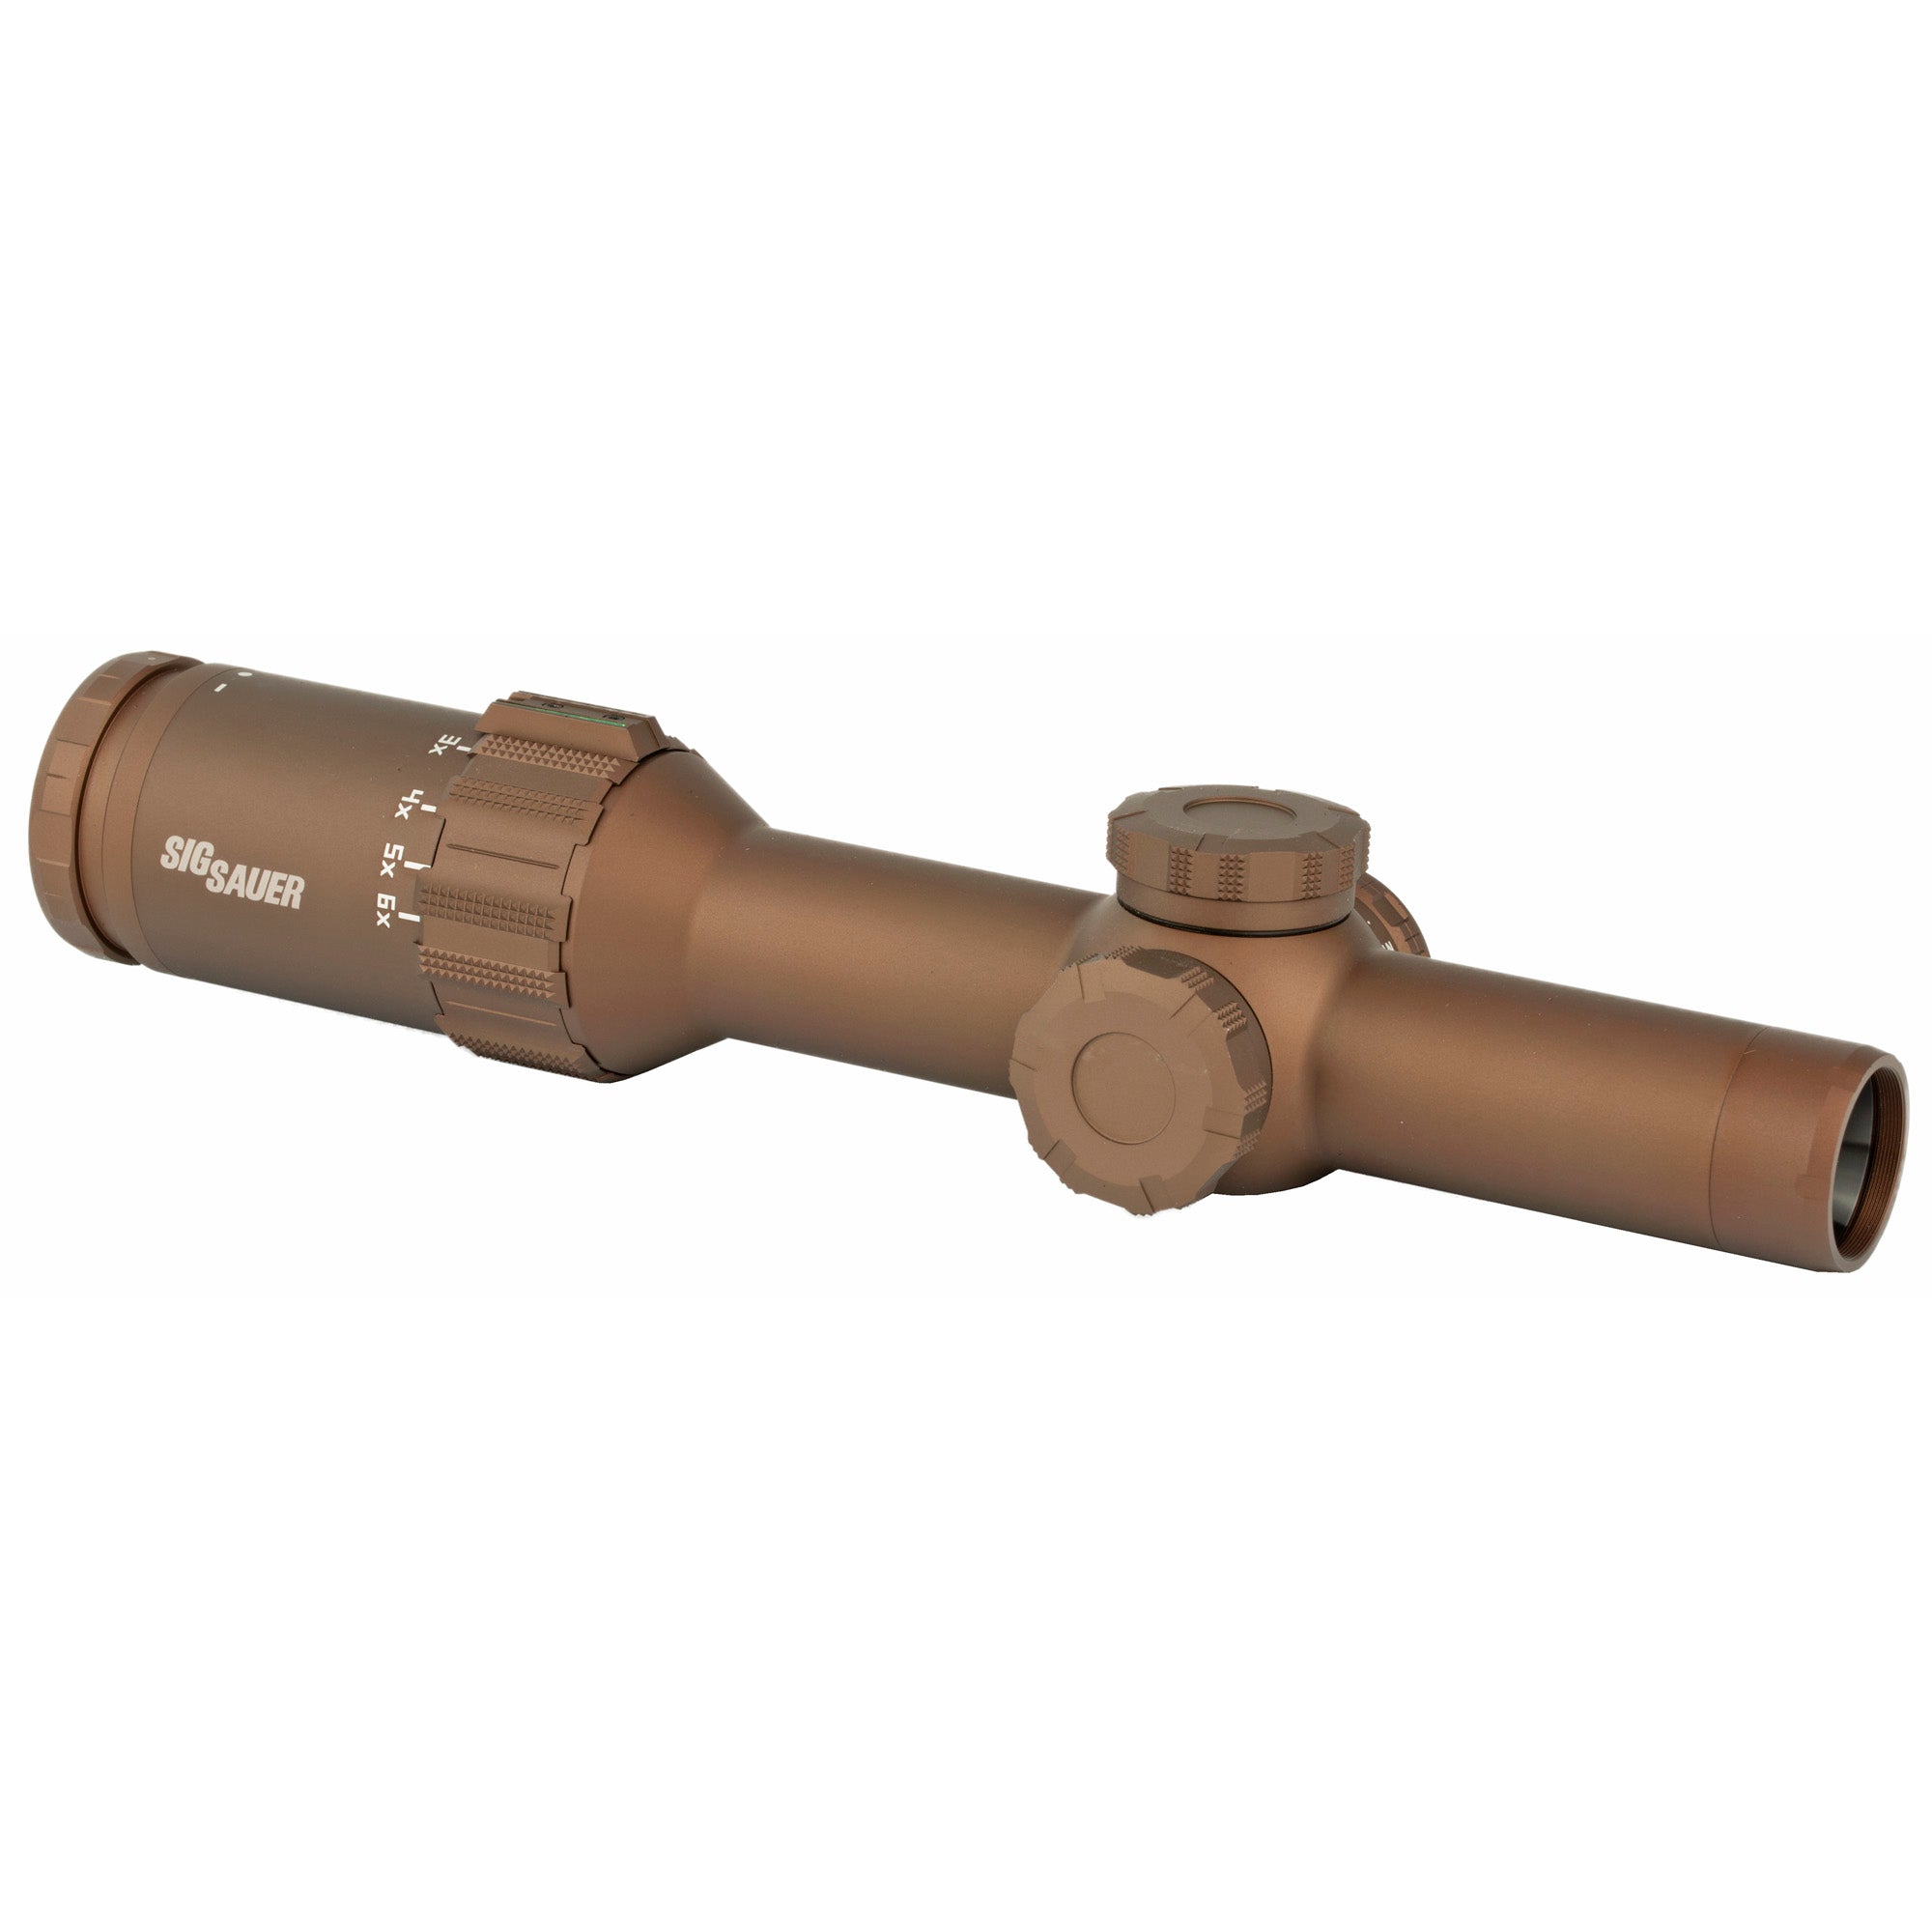 Sig Sauer TANGO 6T 1-6x24mm Rifle Scope in Flat Dark Earth, featuring an illuminated first focal plane 556-762 horseshoe reticle, equipped with night vision settings and HDX optics.